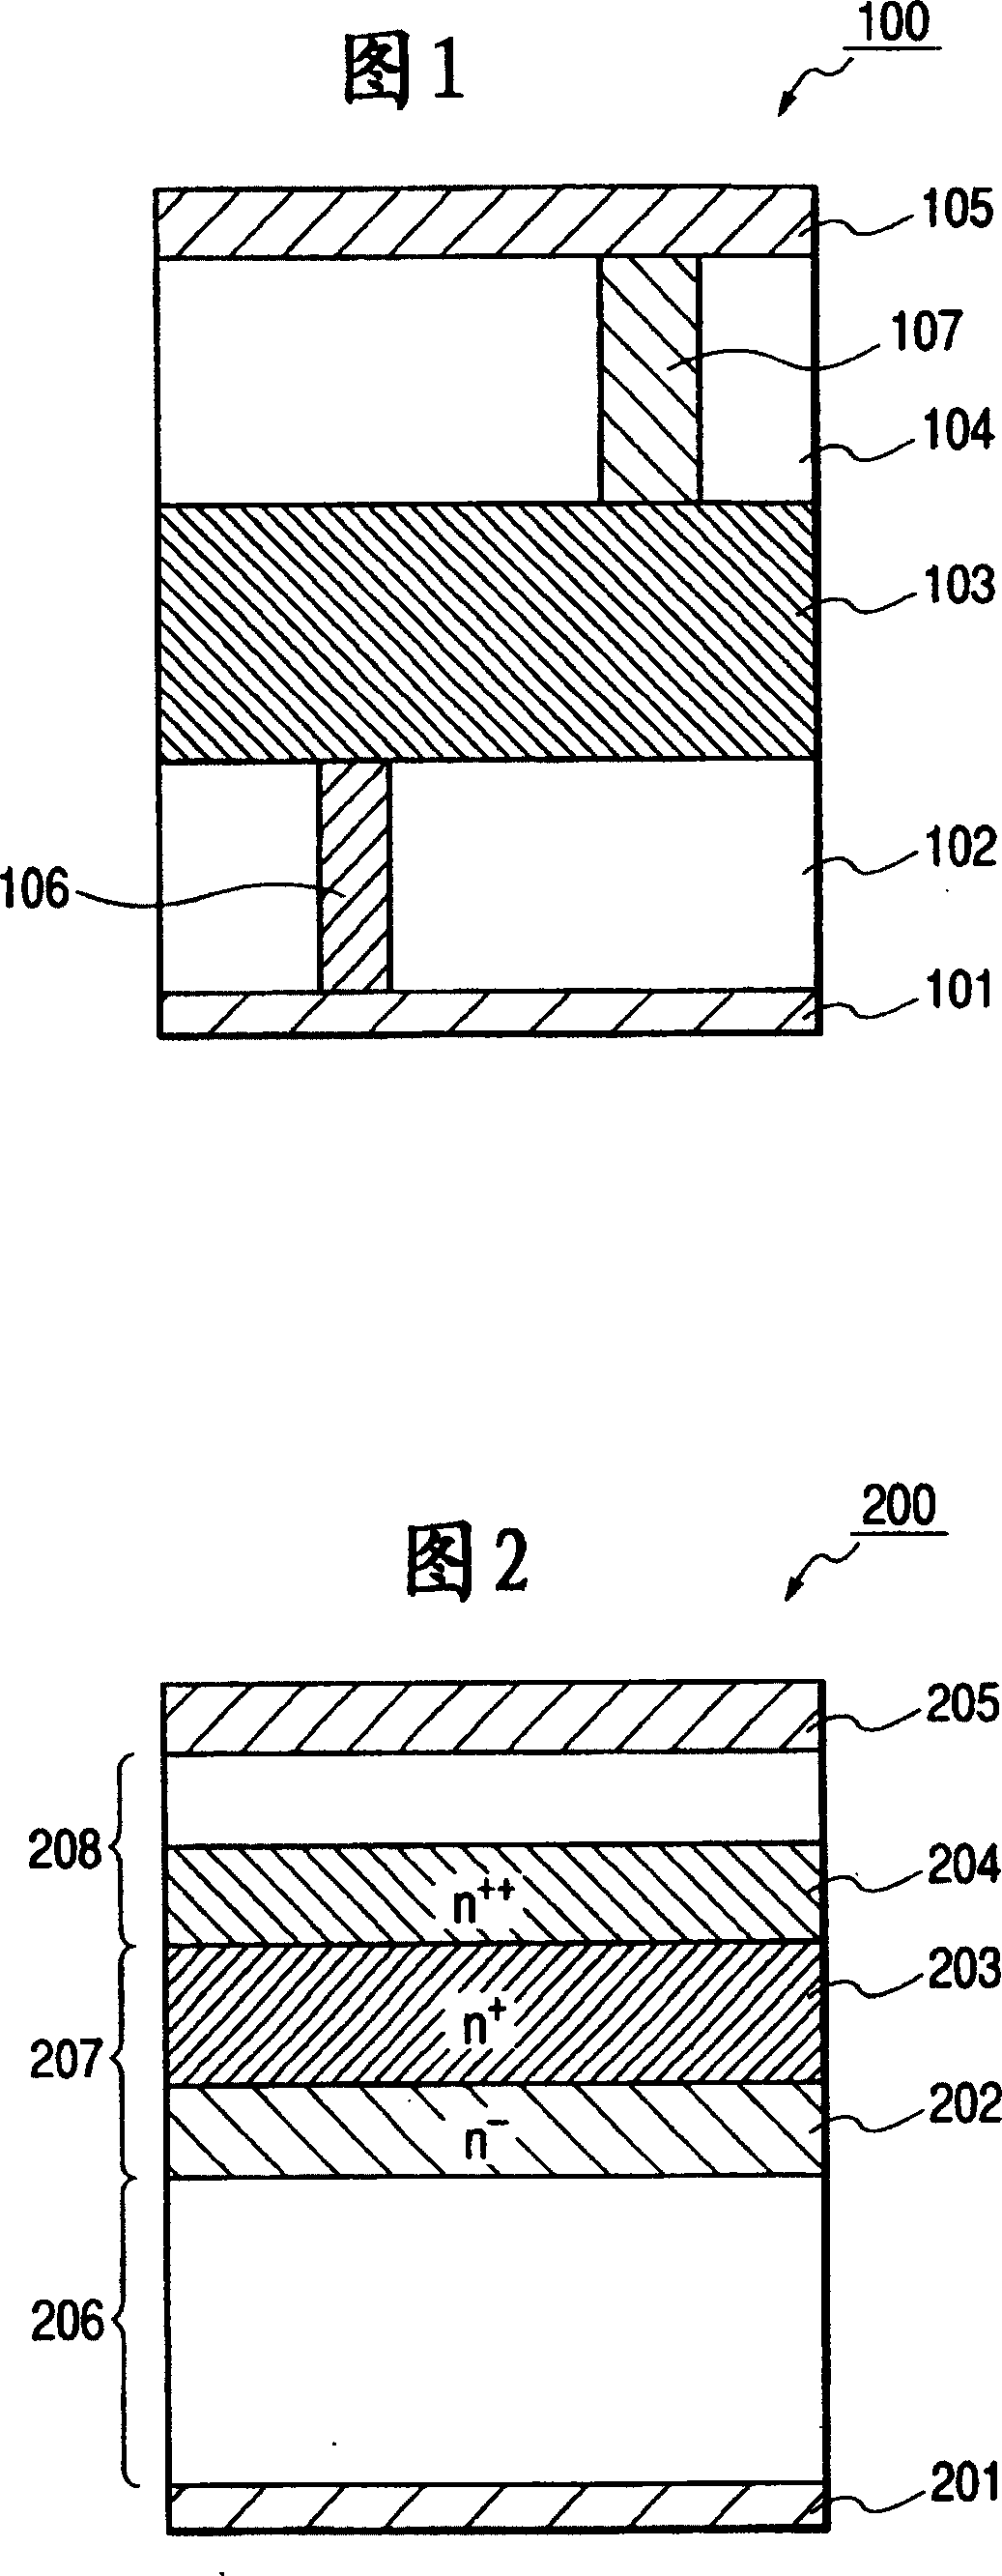 Laminated photoelectric element and making method thereof